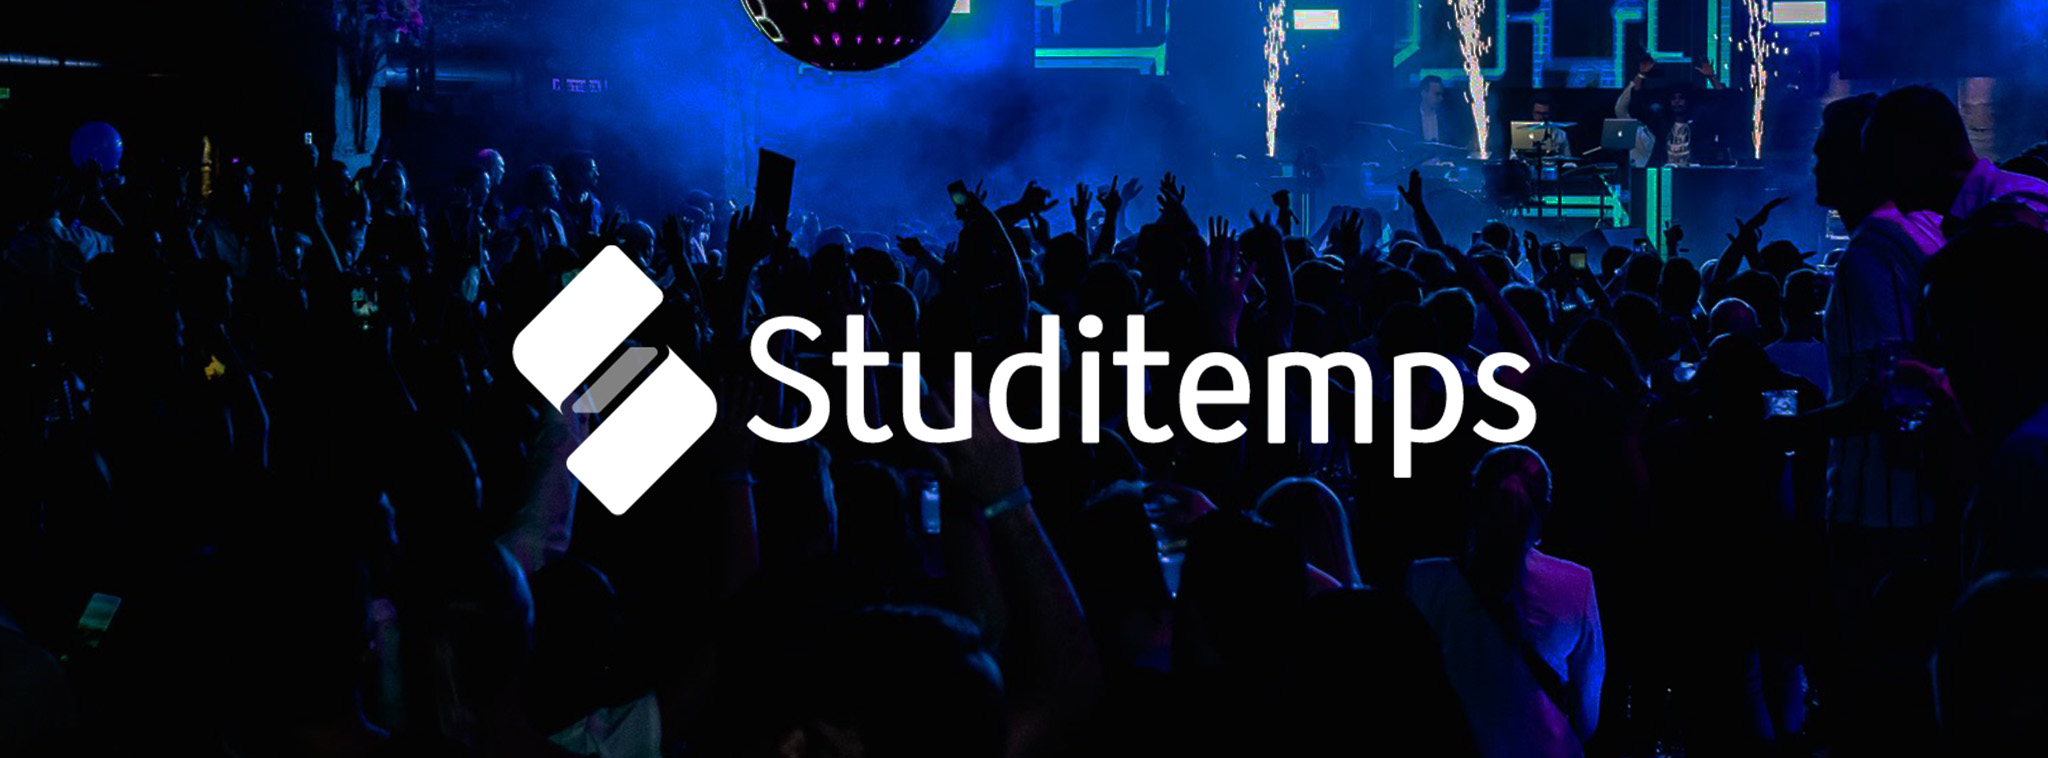 Studitemps gives away 50 free tickets!